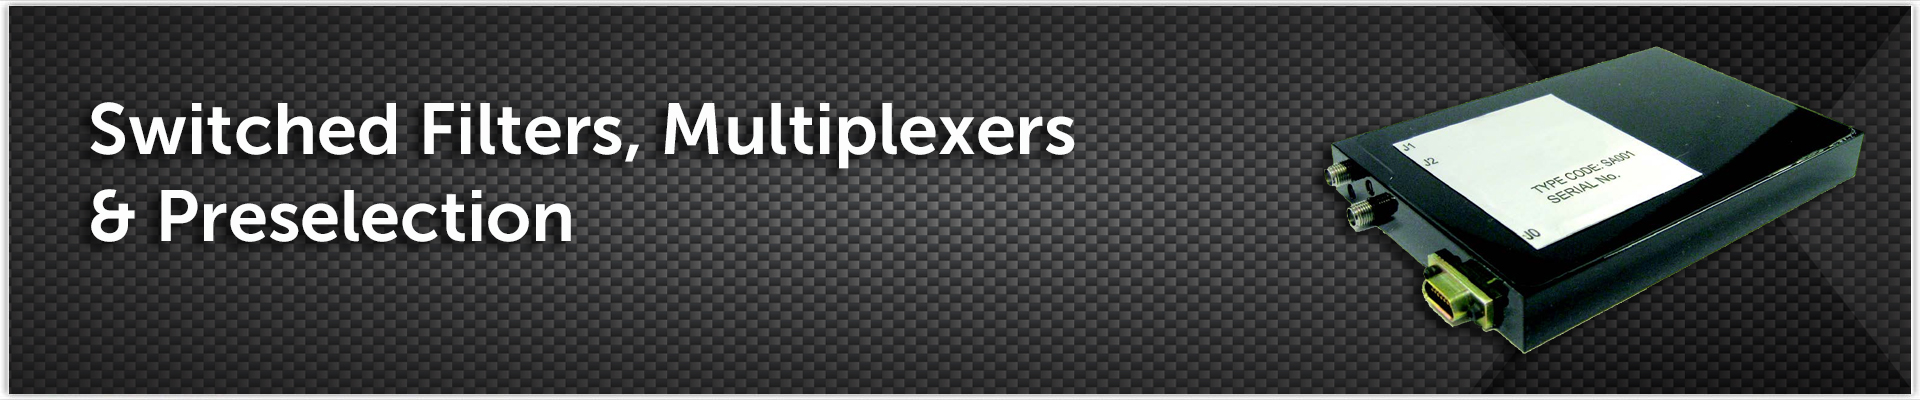 Switched Filters, Multiplexers & Preselection